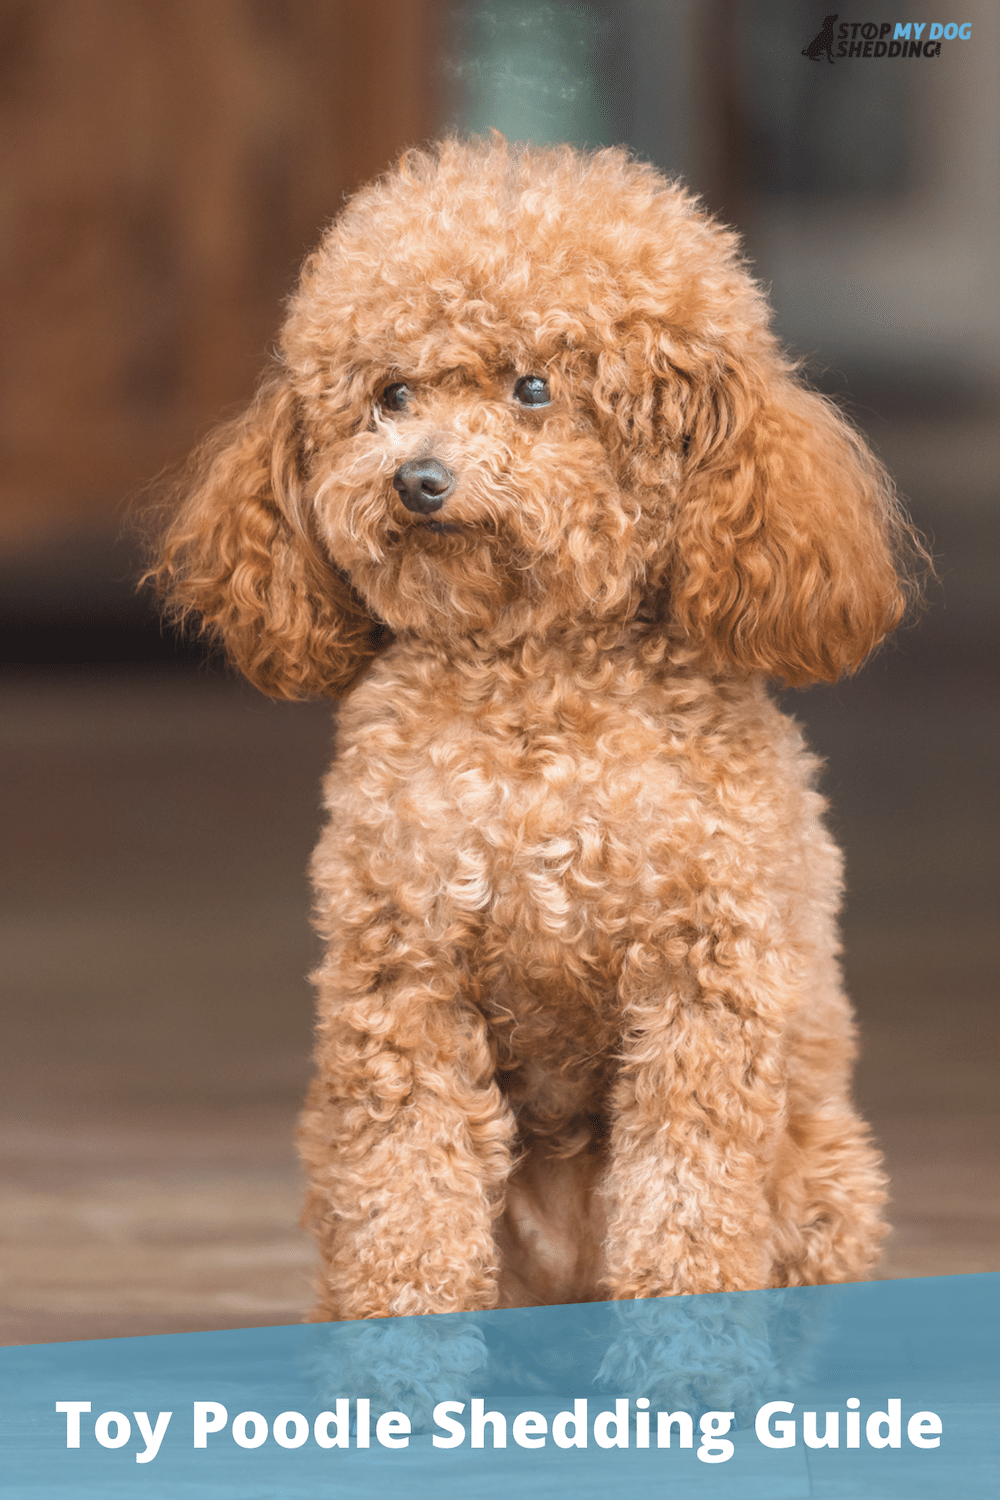 Do Toy Poodles Shed? (Shedding and Grooming Guide)